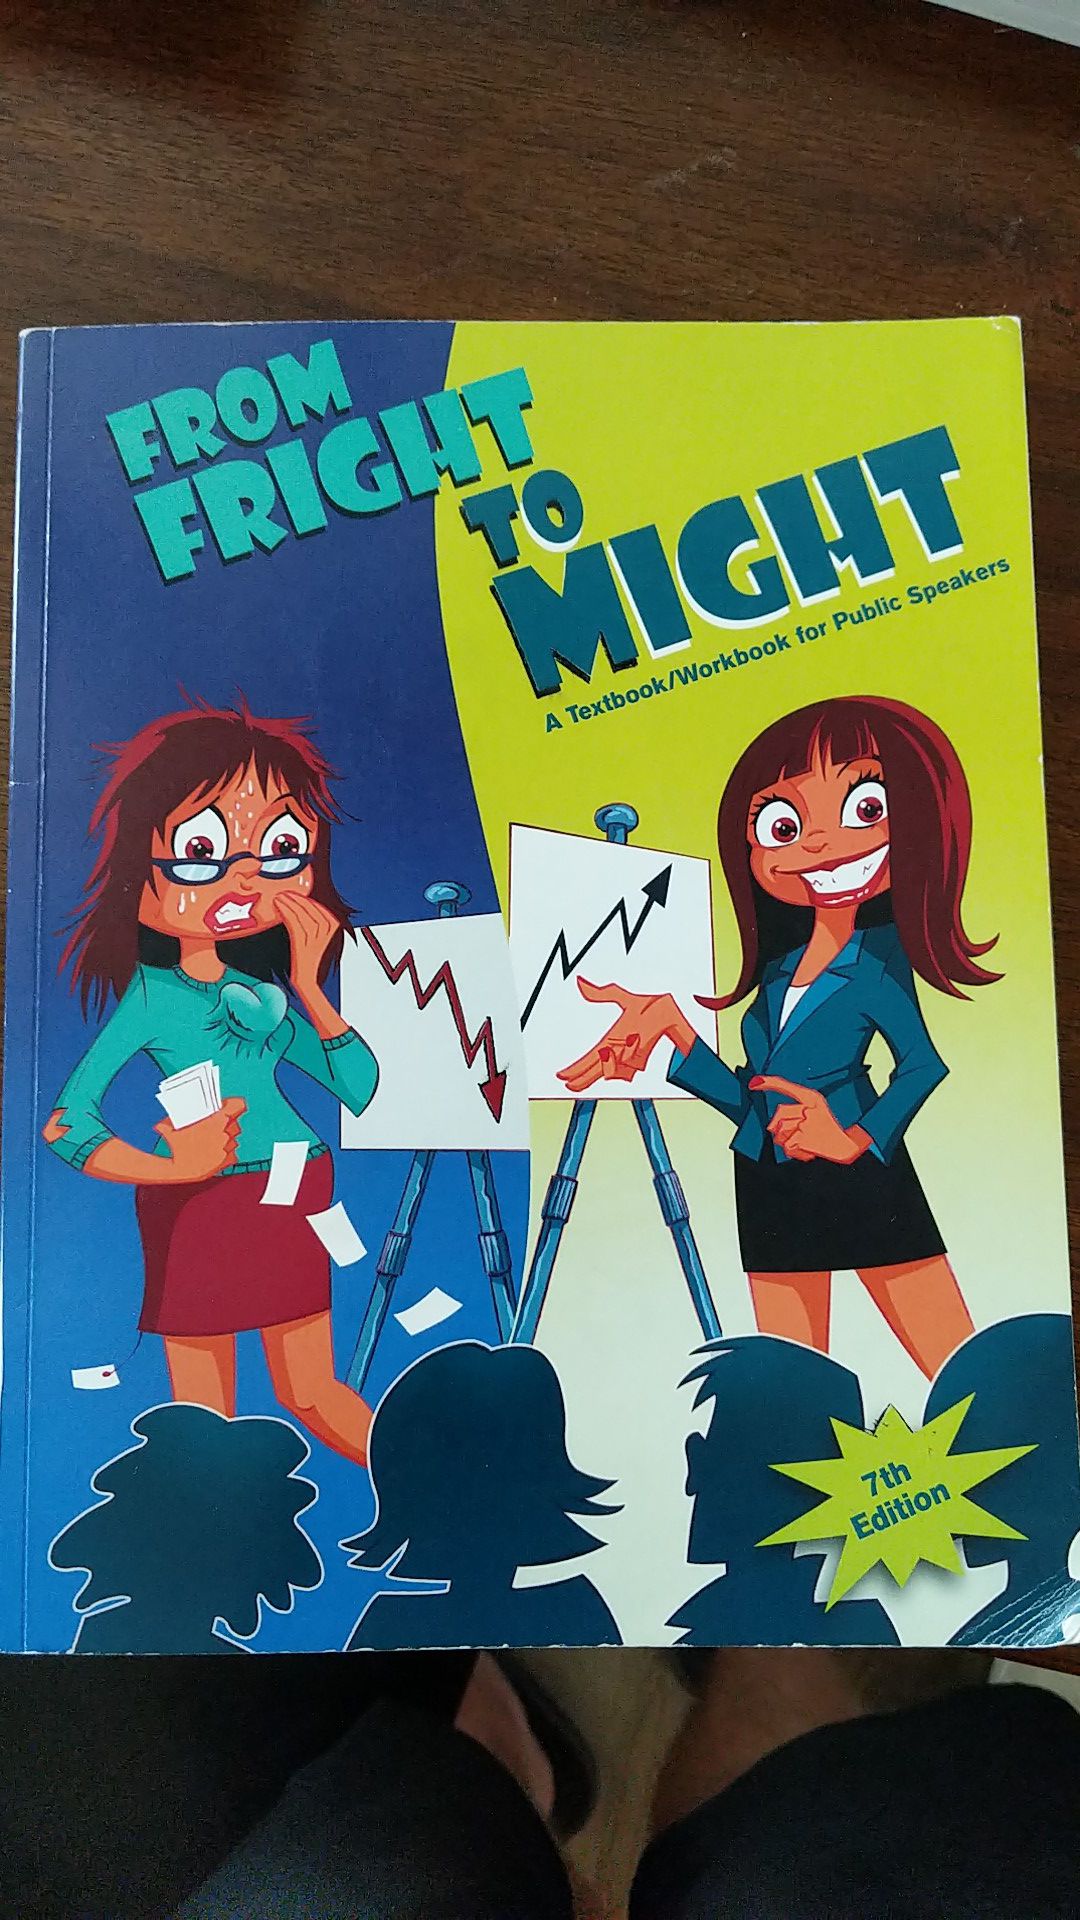 From fright to might a textbook / workbook for public speaker 7th edition